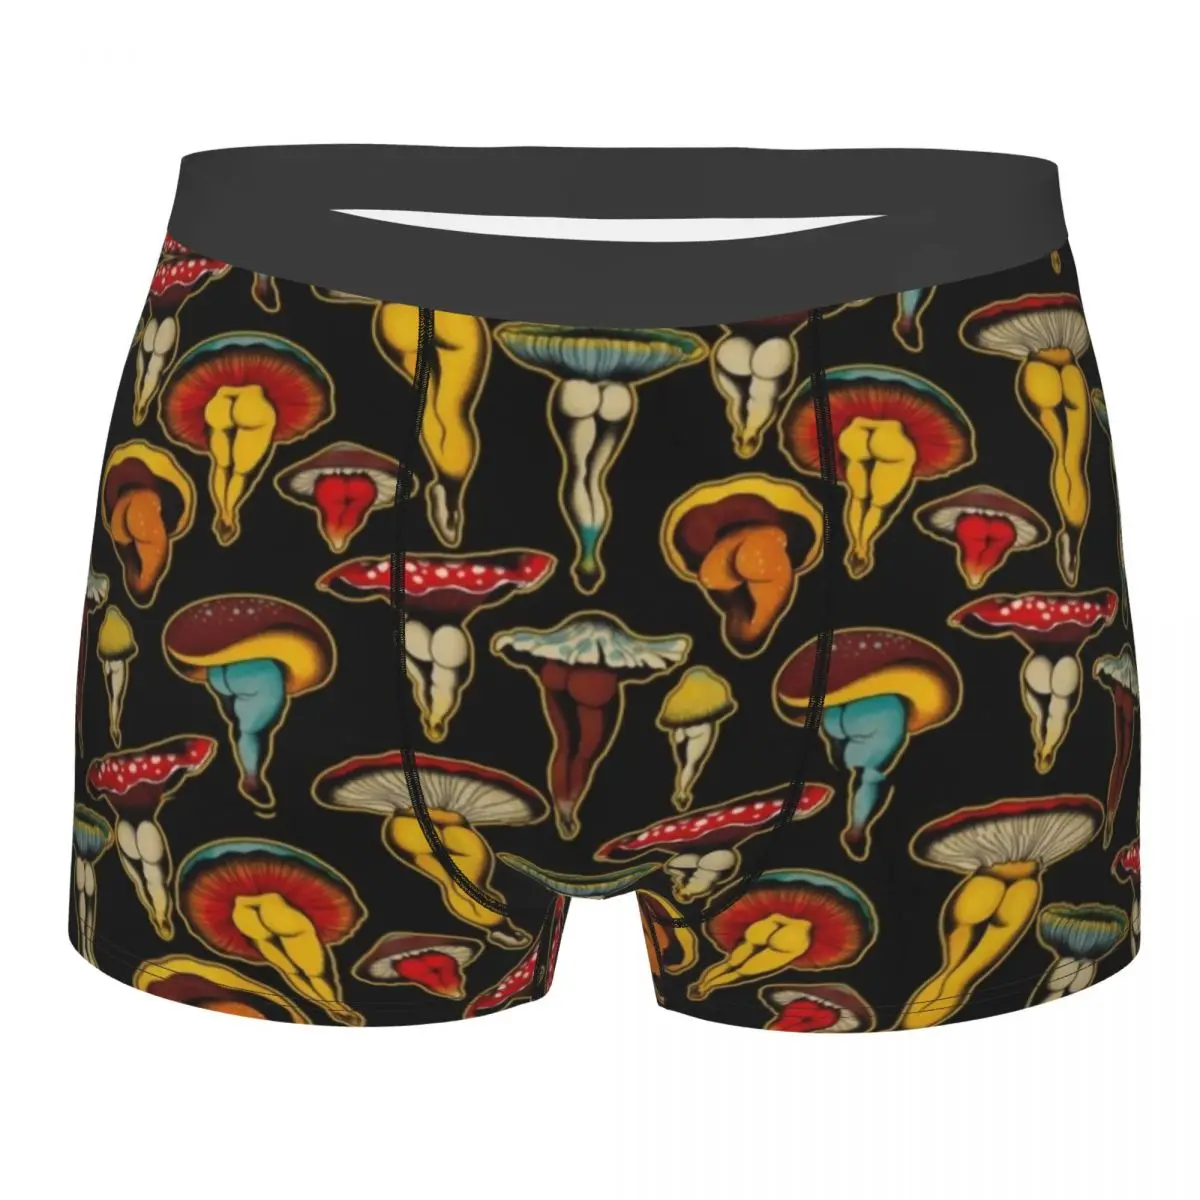 Sexy Mushroom Men's Boxer Briefs Highly Breathable Underpants Top Quality 3D Print Shorts Birthday Gifts